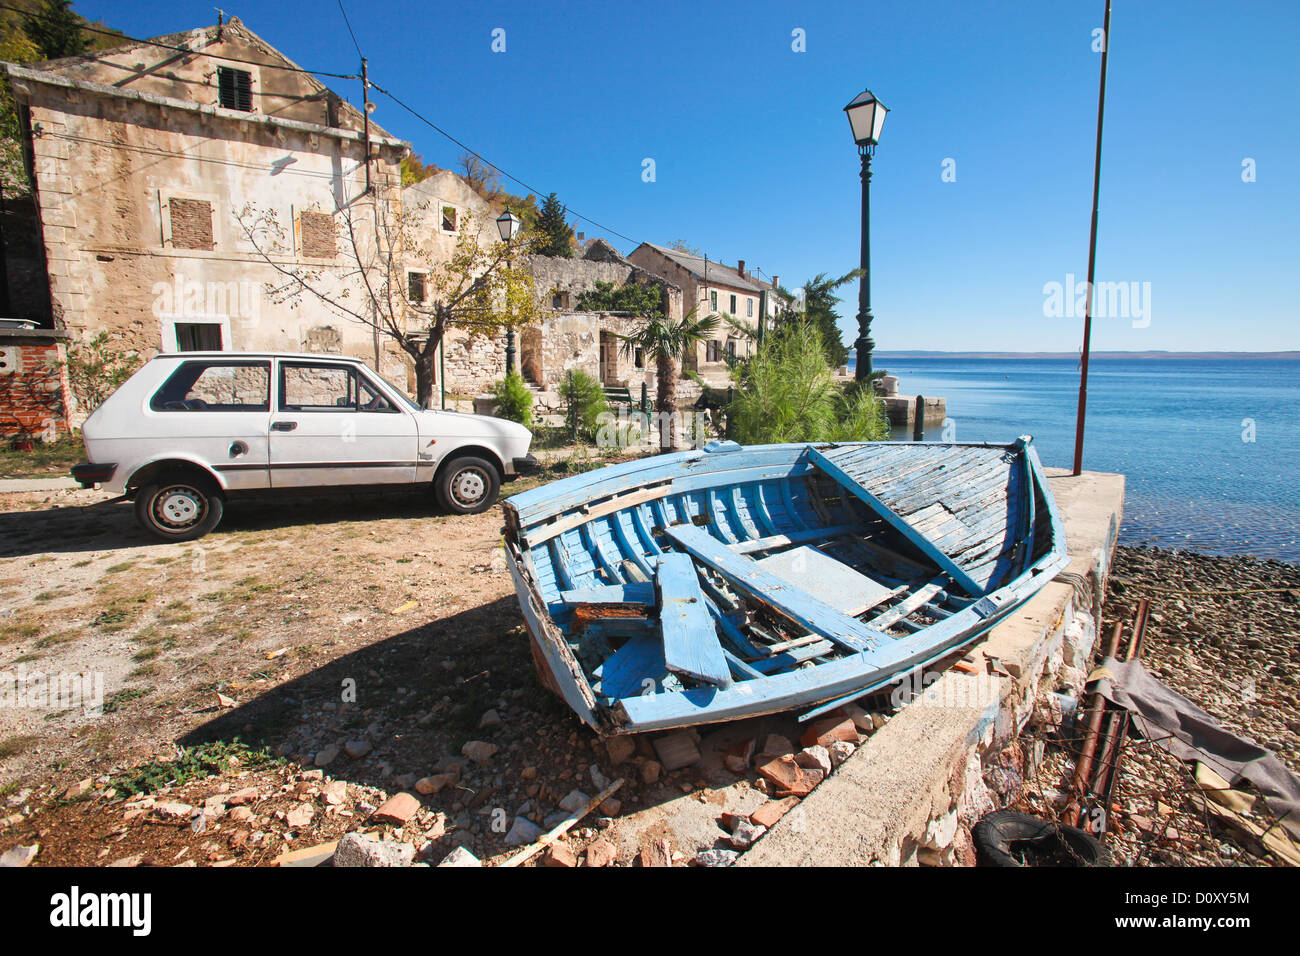 Old wooden fishing boat abandoned in little village along the coast in Croatia Stock Photo